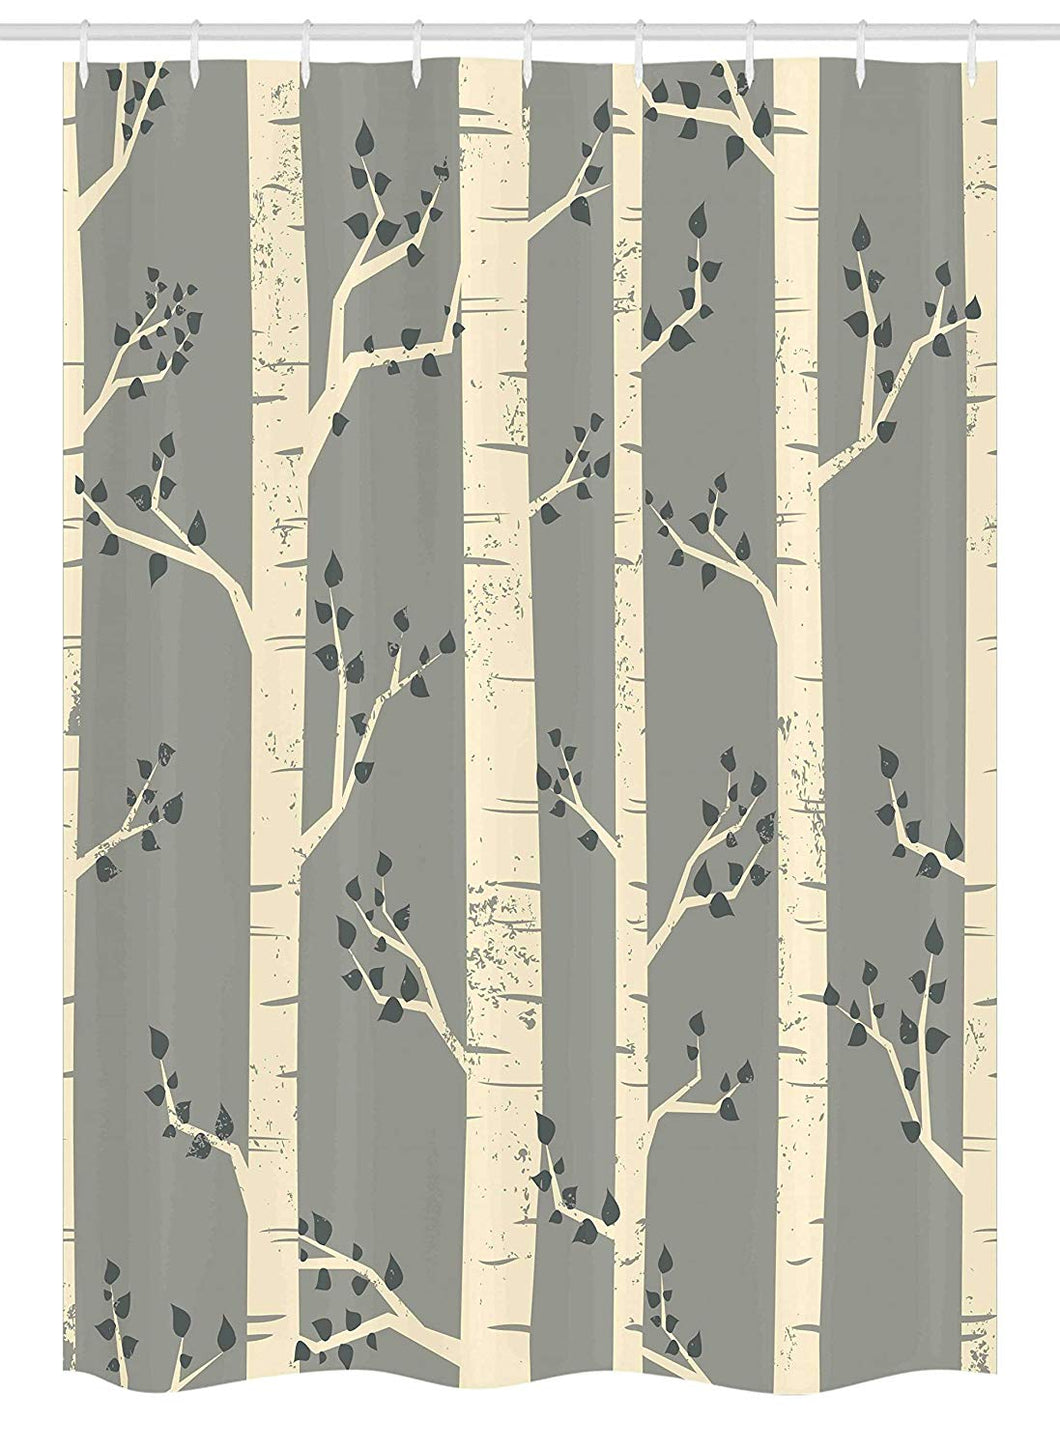 Ambesonne Grey Stall Shower Curtain, Birch Tree Branches Vintage Bohemian Contemporary Illustration of Nature, Fabric Bathroom Decor Set with Hooks, 54